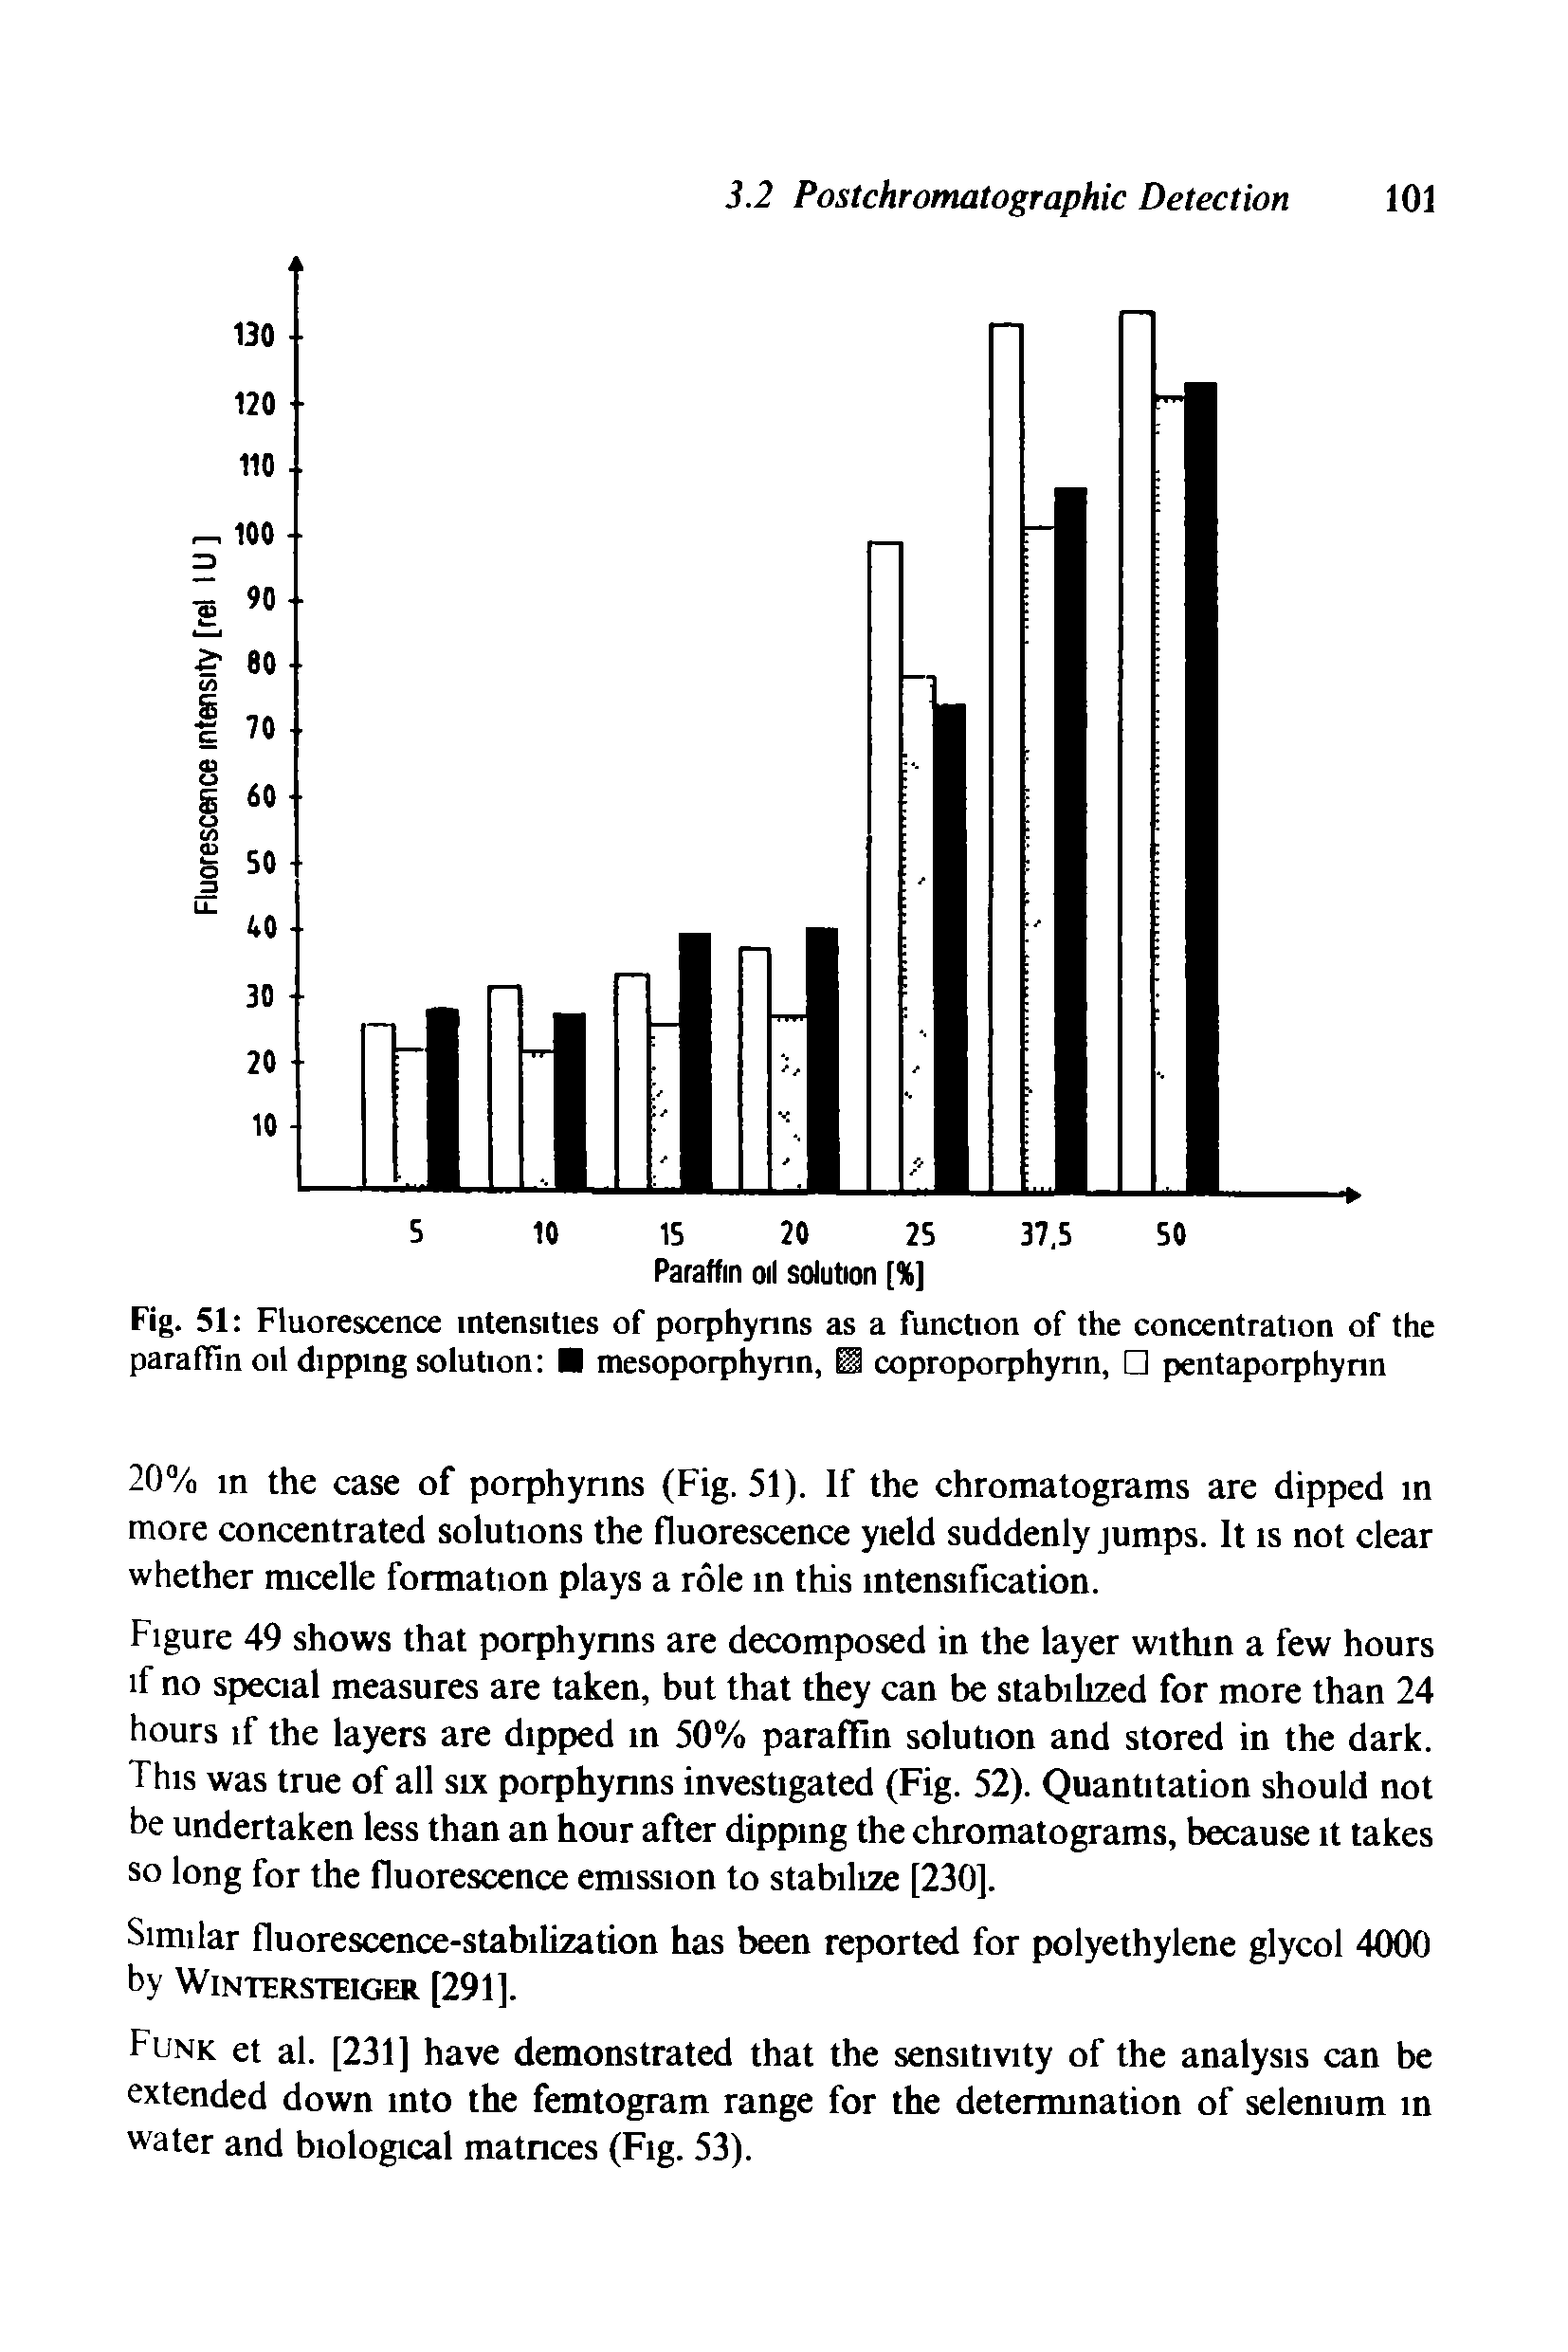 Figure 49 shows that porphynns are decomposed in the layer within a few hours if no special measures are taken, but that they can be stabilized for more than 24 hours if the layers are dipped m 50% paraffin solution and stored in the dark. This was true of all six porphynns investigated (Fig. 52). Quantitation should not be undertaken less than an hour after dipping the chromatograms, because it takes so long for the fluorescence emission to stabilize [230].